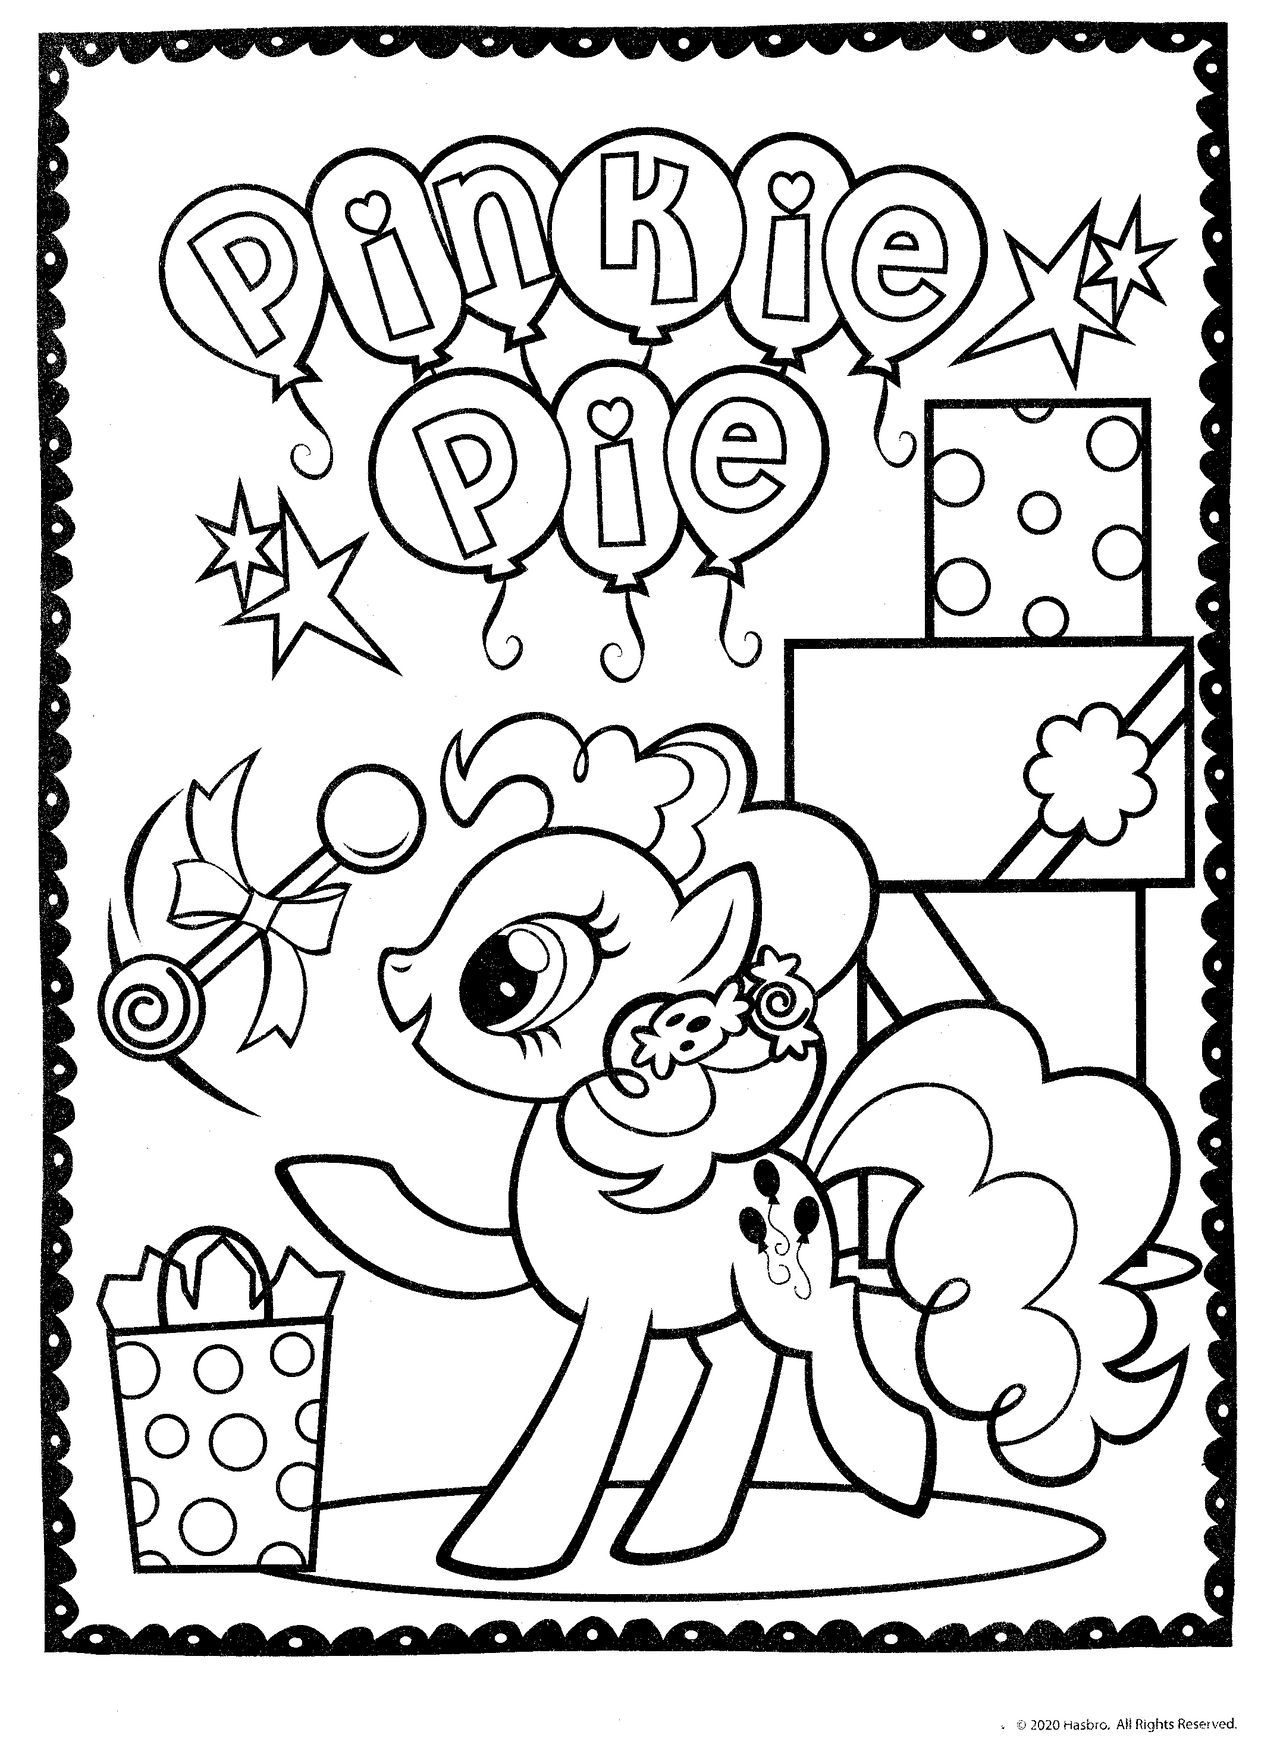 046 MLP My Little Pony coloring page by magnificent-coloring on DeviantArt